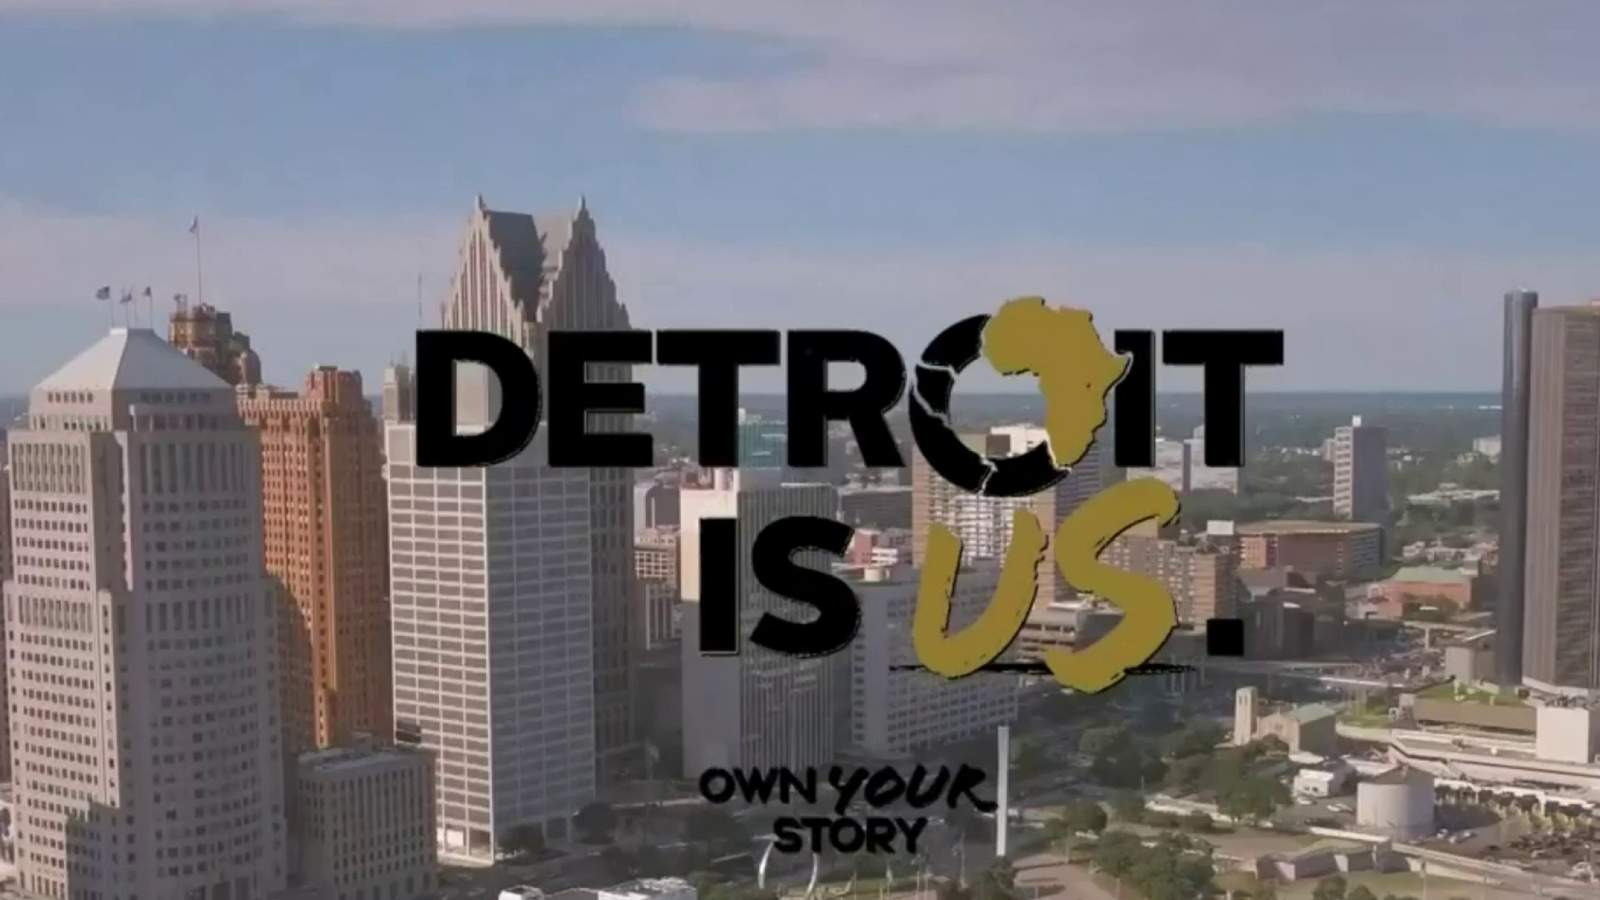 ‘Detroit Is Us’ aims to capture the true story of Detroit and its people